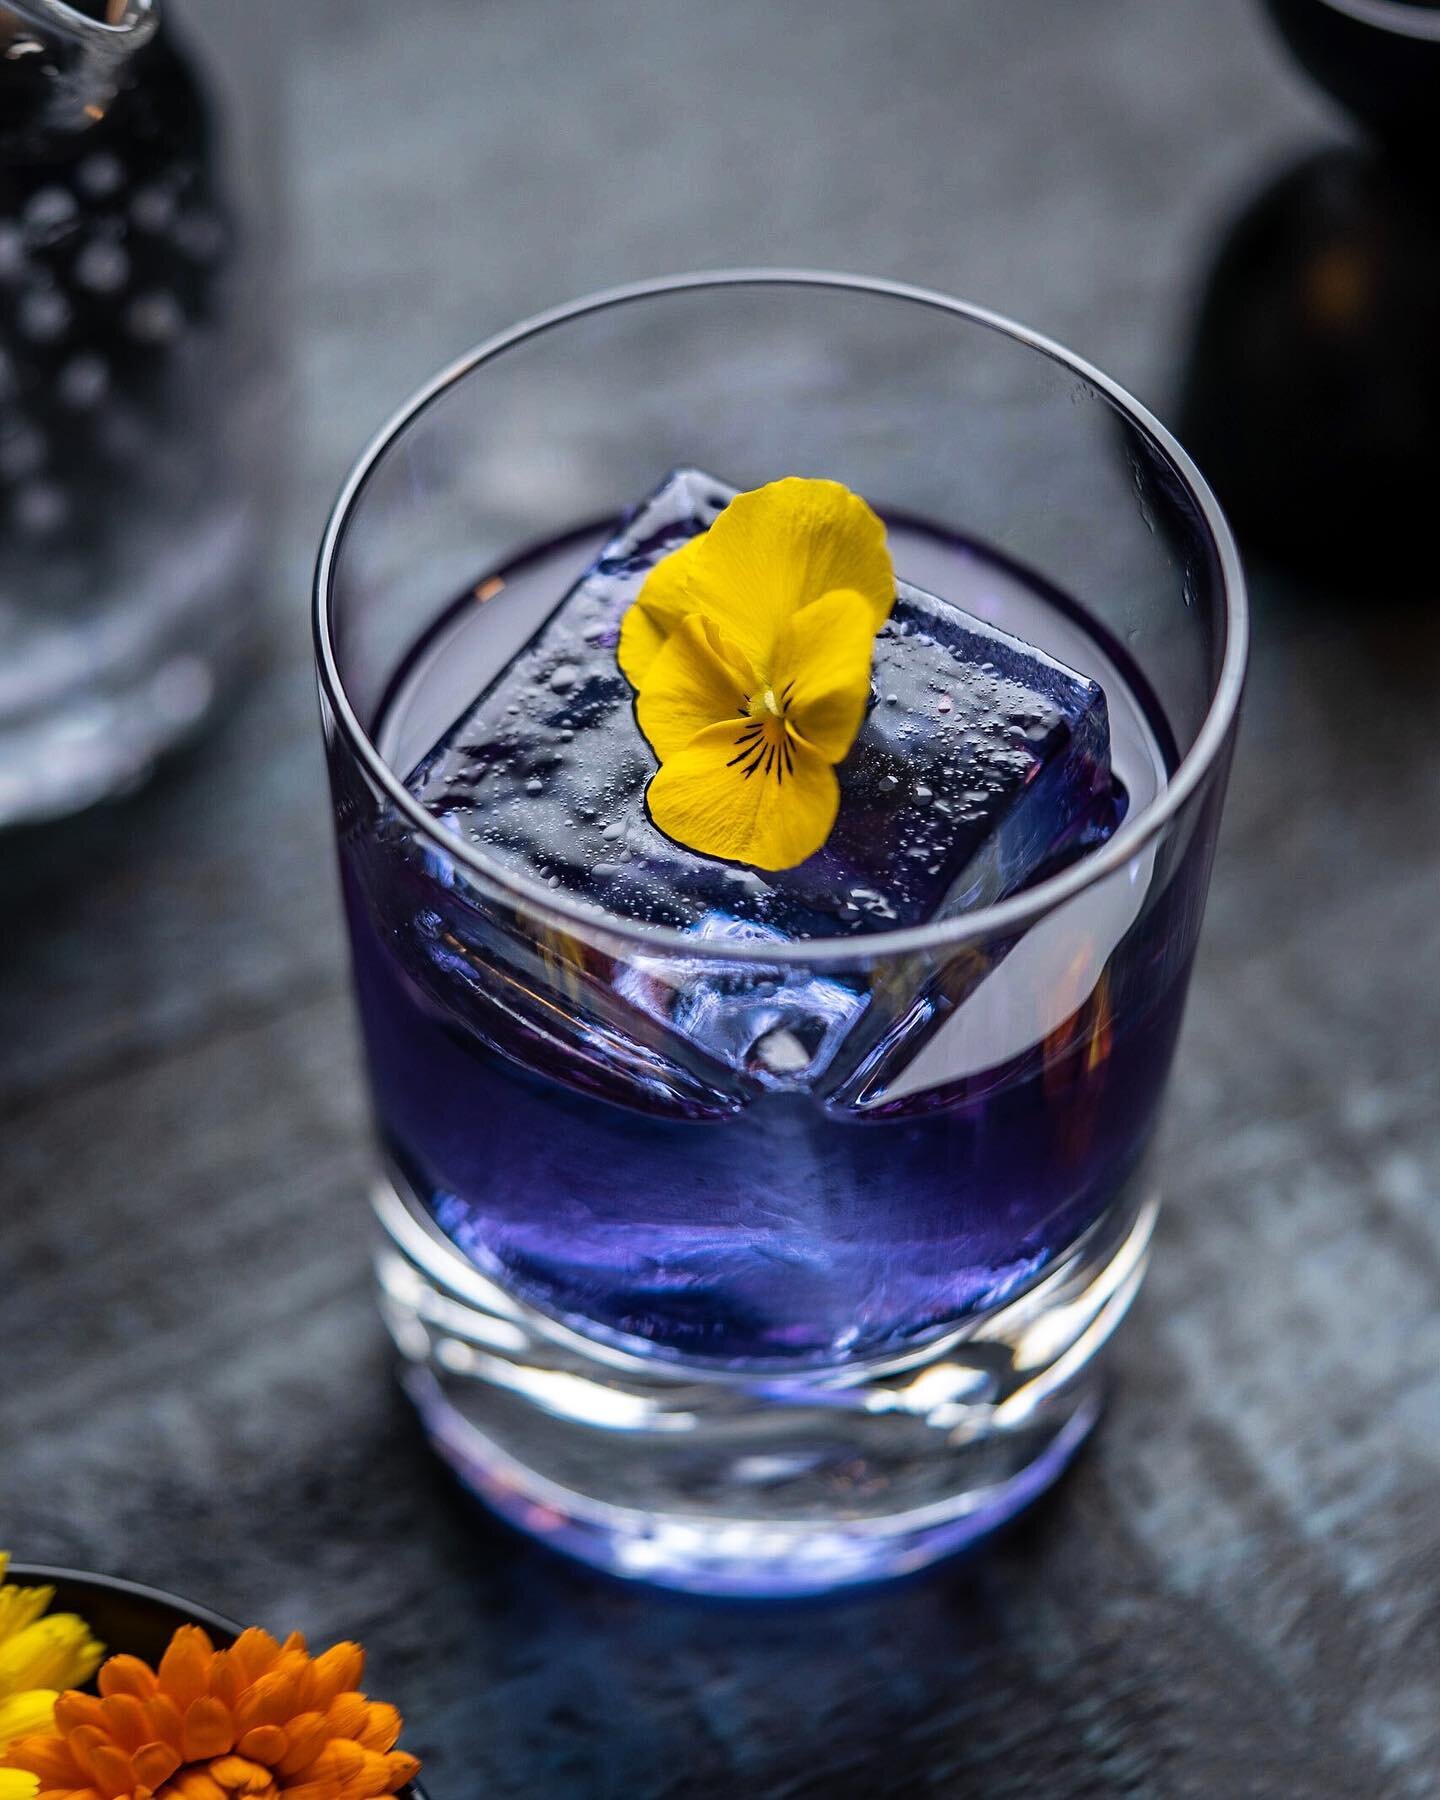 Back on that mezcal kick! I&rsquo;ve been experimenting with pairing mezcal and singani together (an amazing Bolivian grape-based spirit) so I thought I&rsquo;d try that combo in an Old Fashioned format. The deep blue color is from infusing the mezca